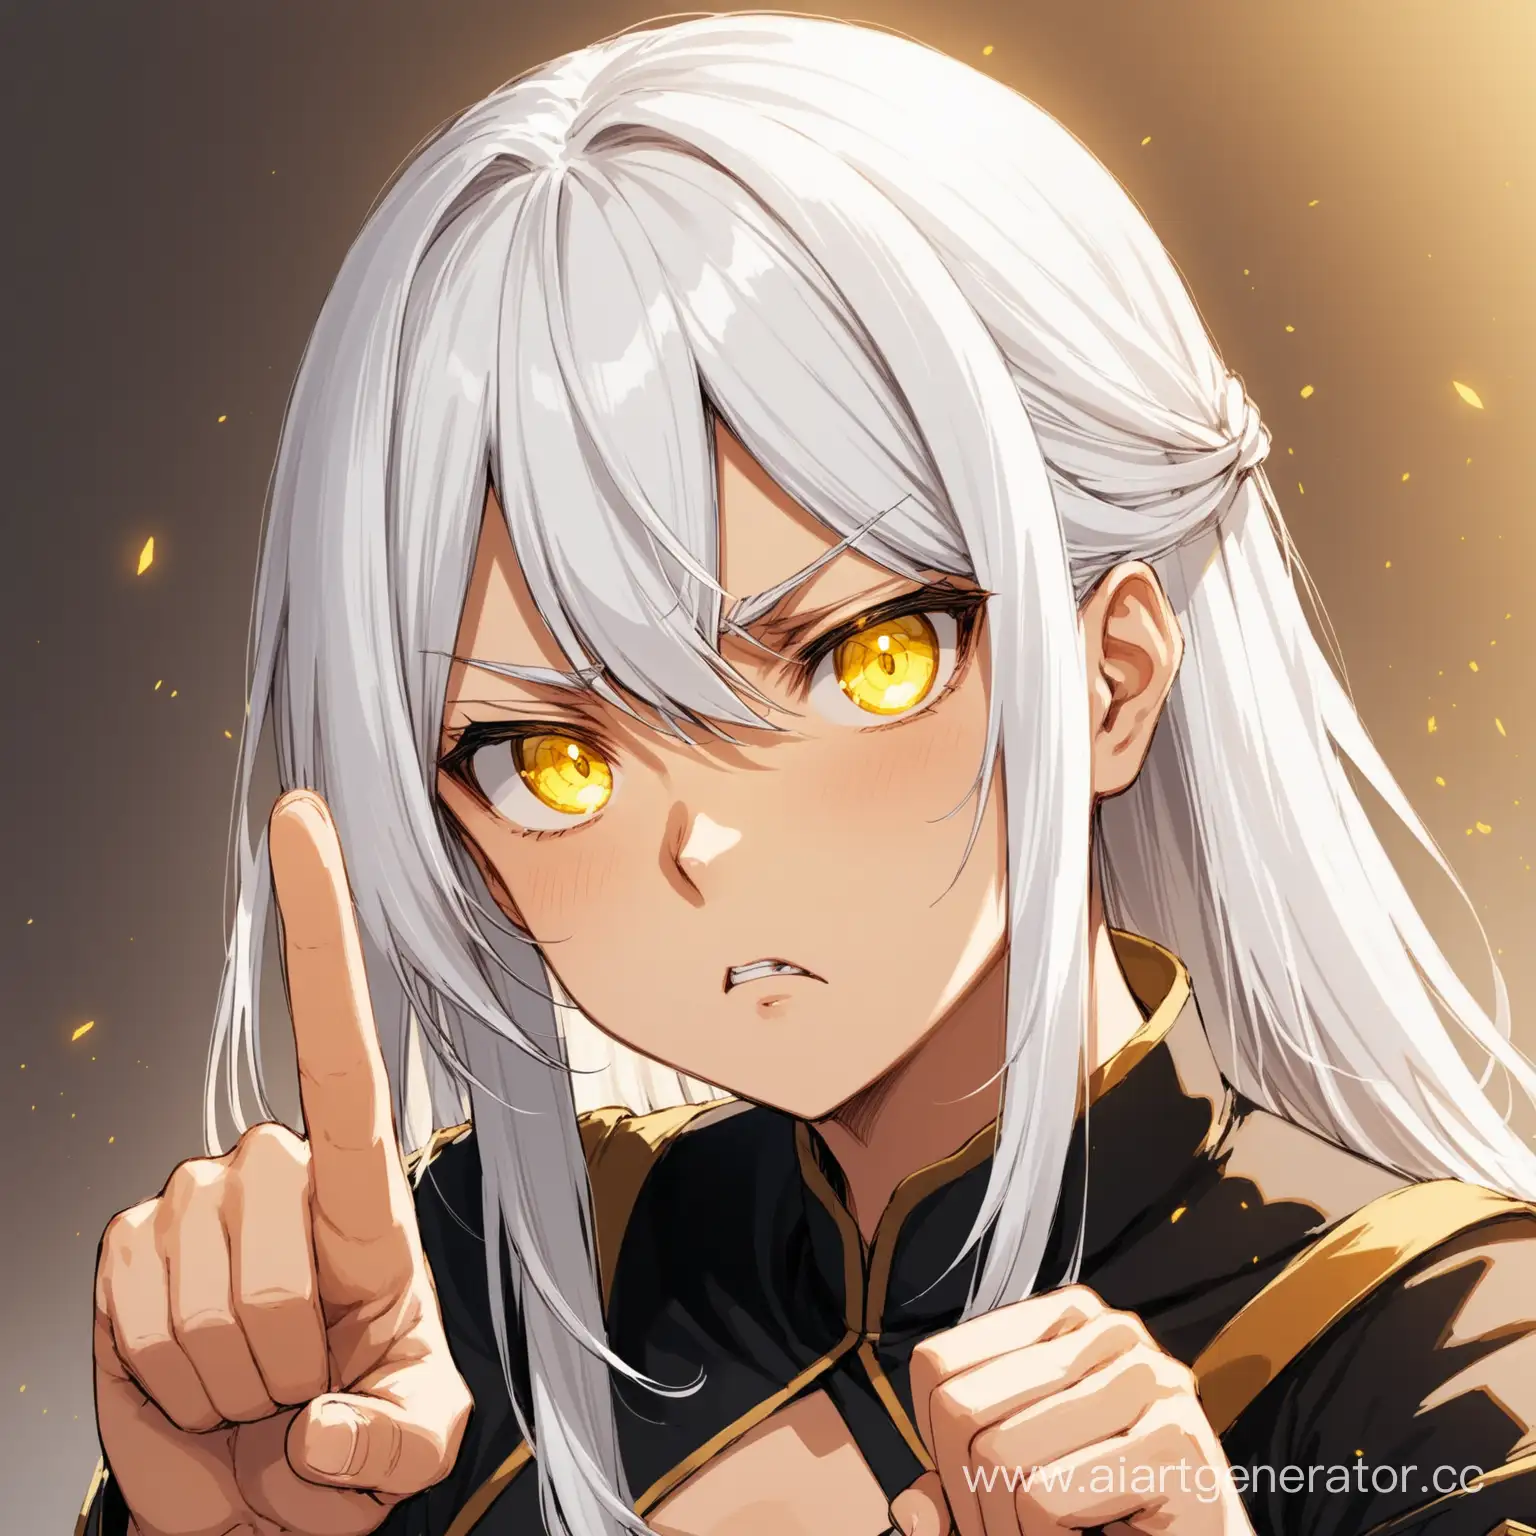 Young-Girl-with-White-Hair-and-Yellow-Eyes-Raising-Finger